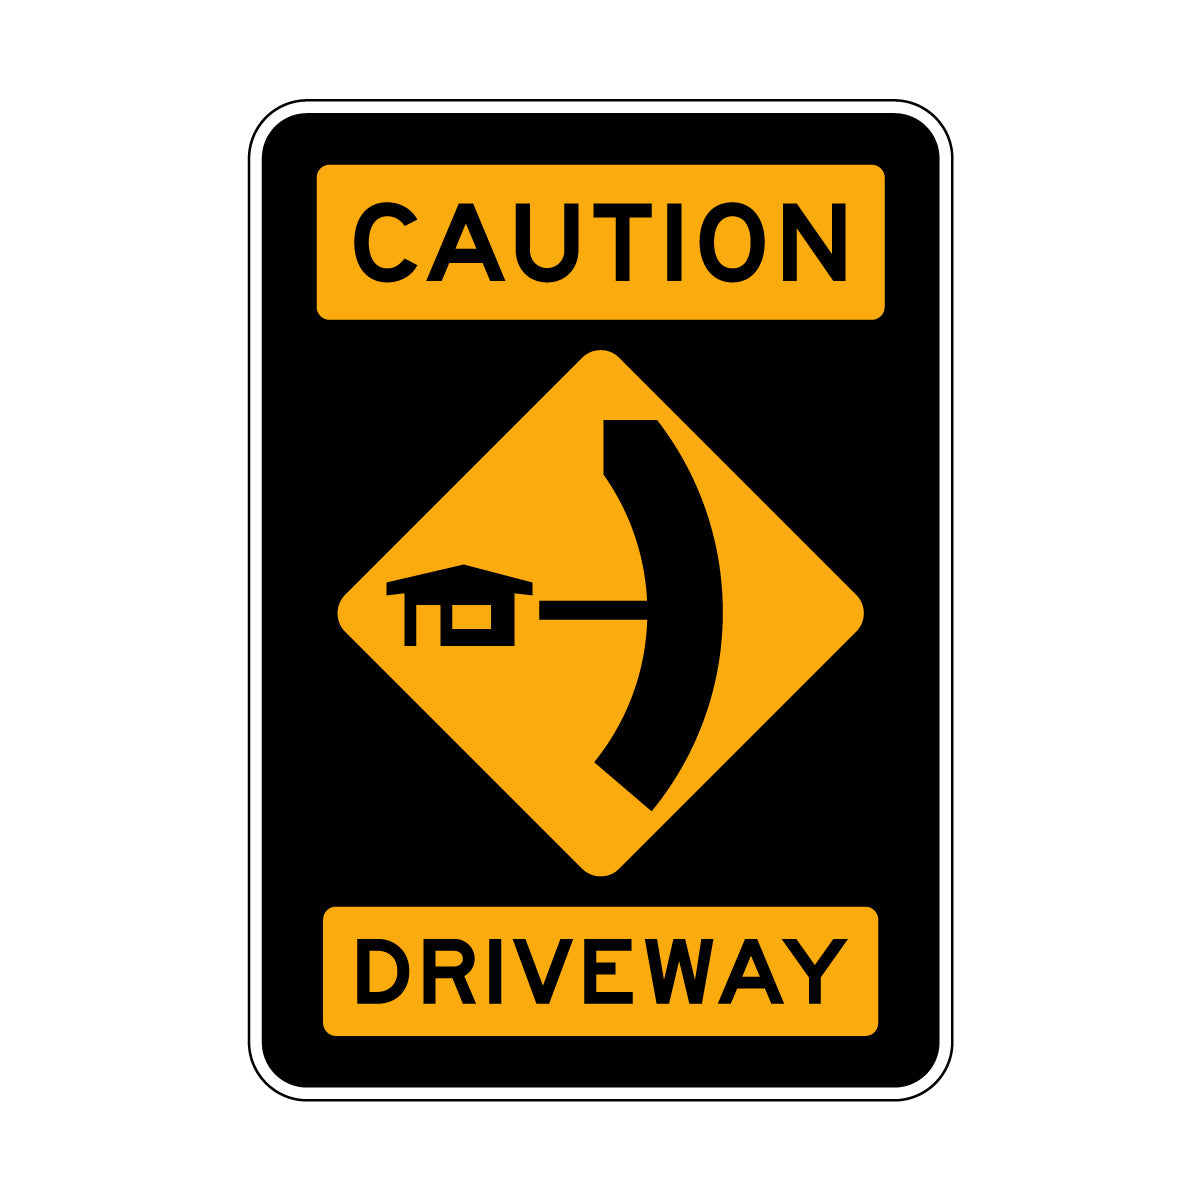 Caution: Driveway Left Sign - Curved Symbol